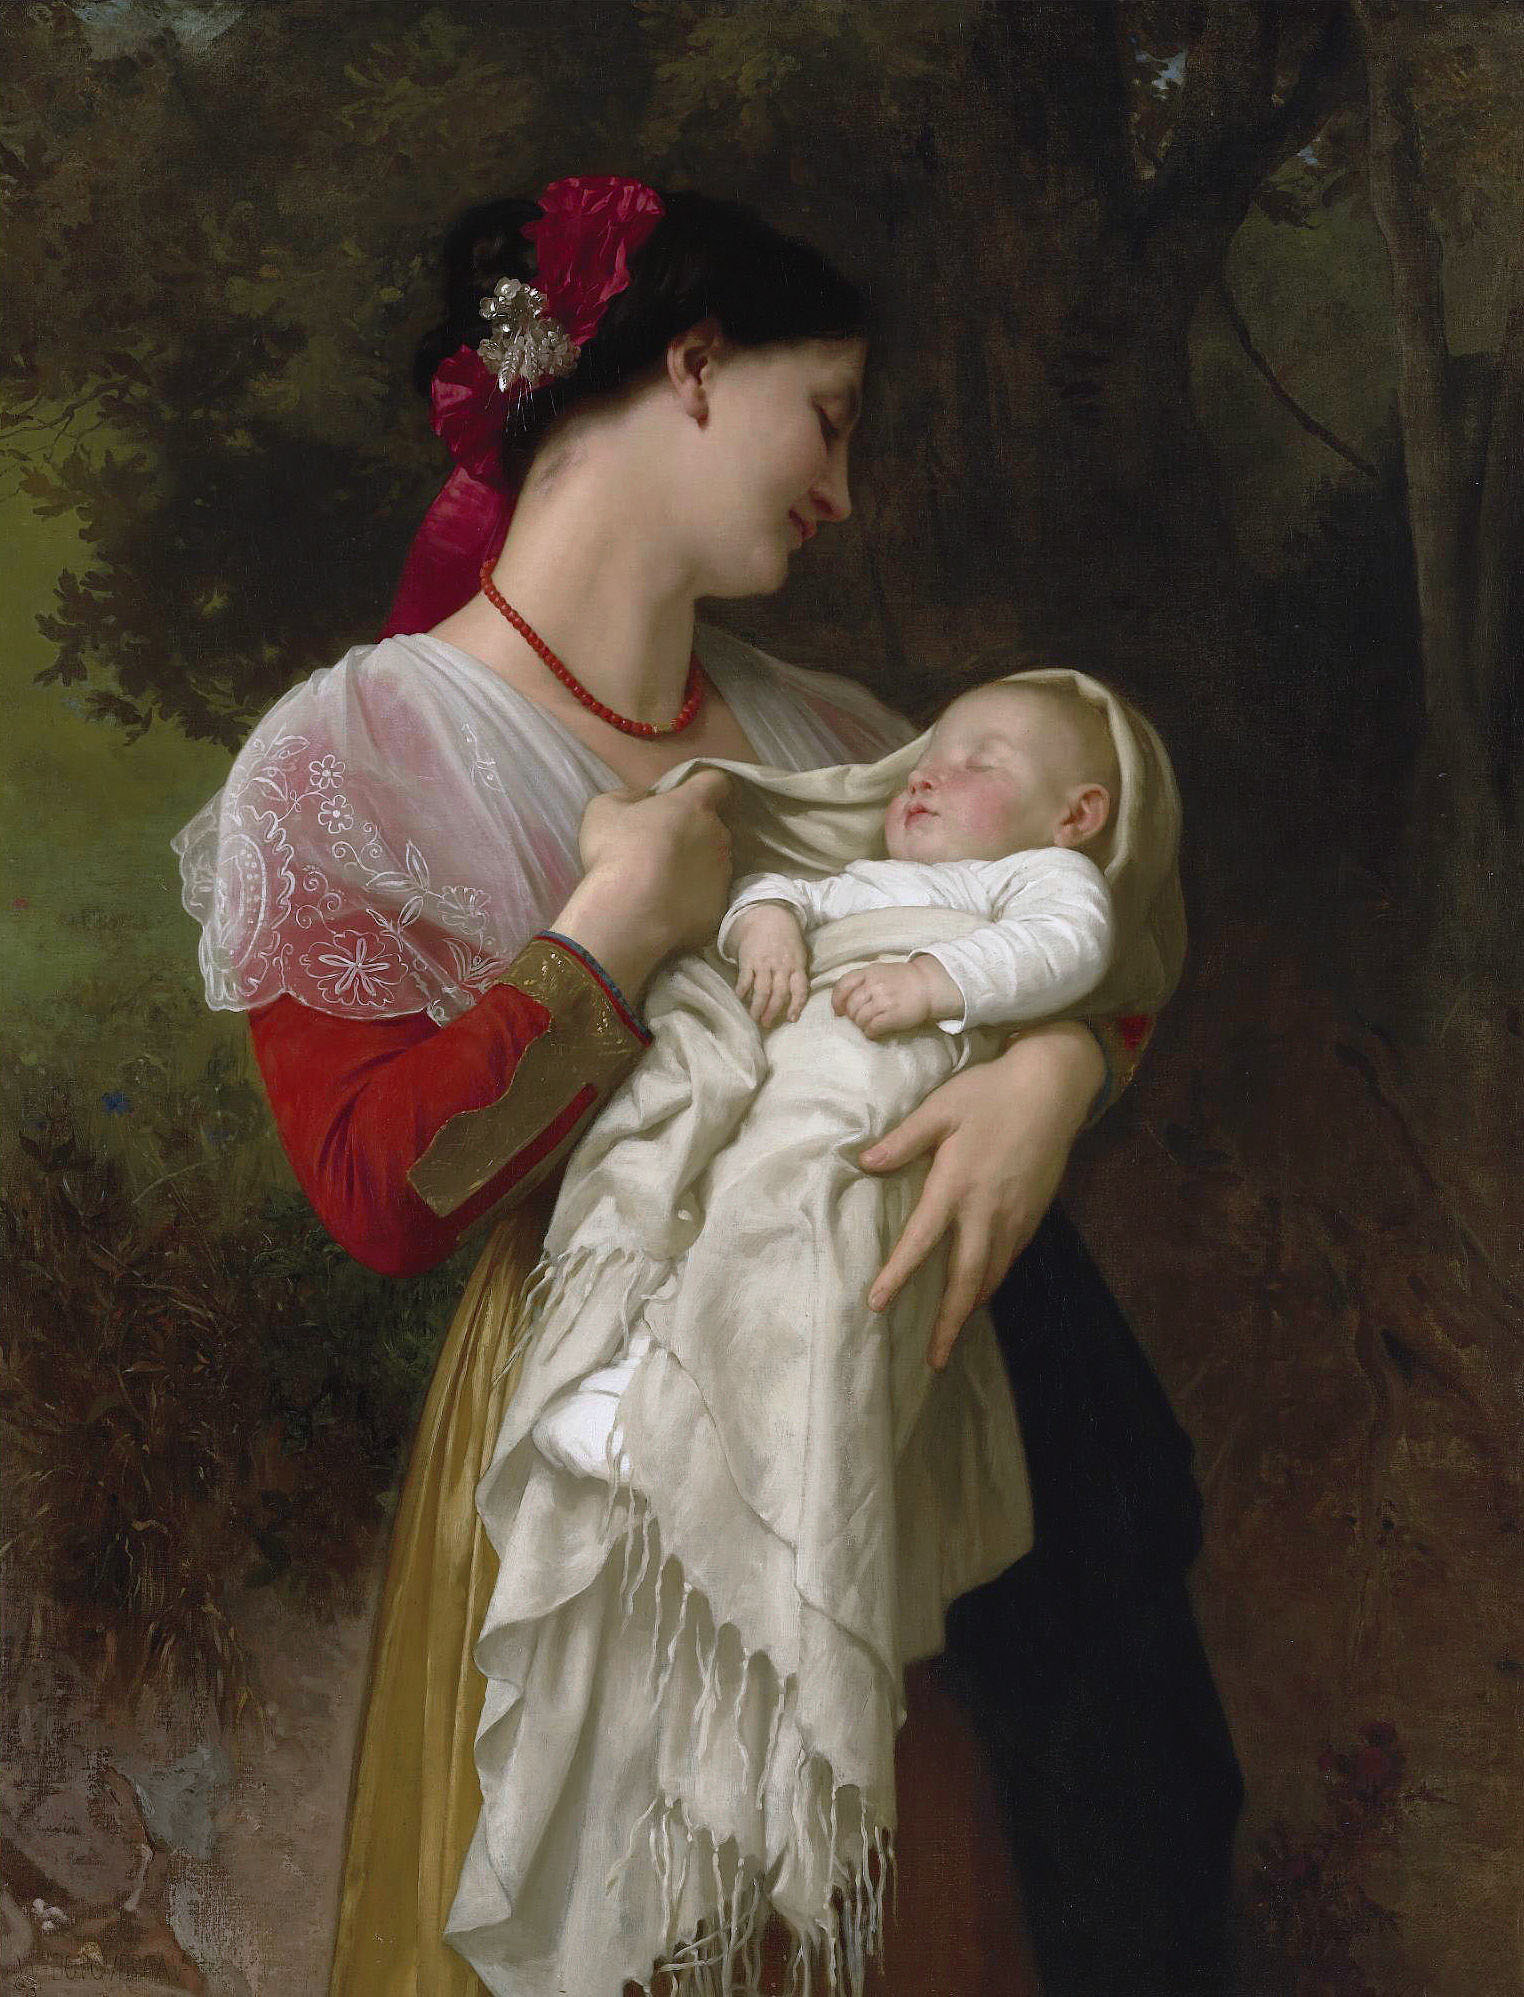 Painting from William-Adolphe Bouguereau (1869)